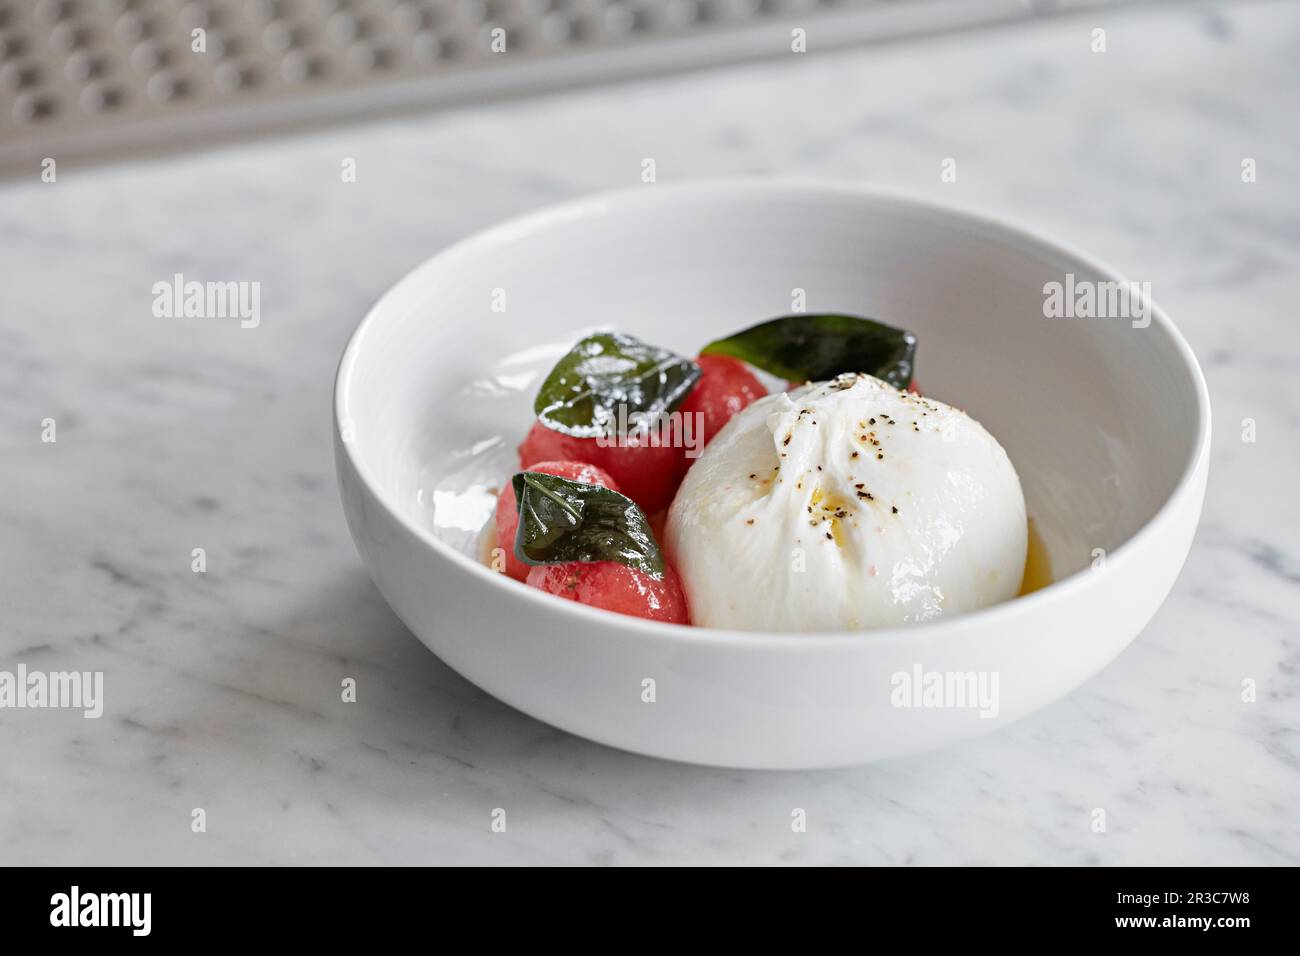 Burrata served with balls of watermelon and drizzled with olive oil Stock Photo